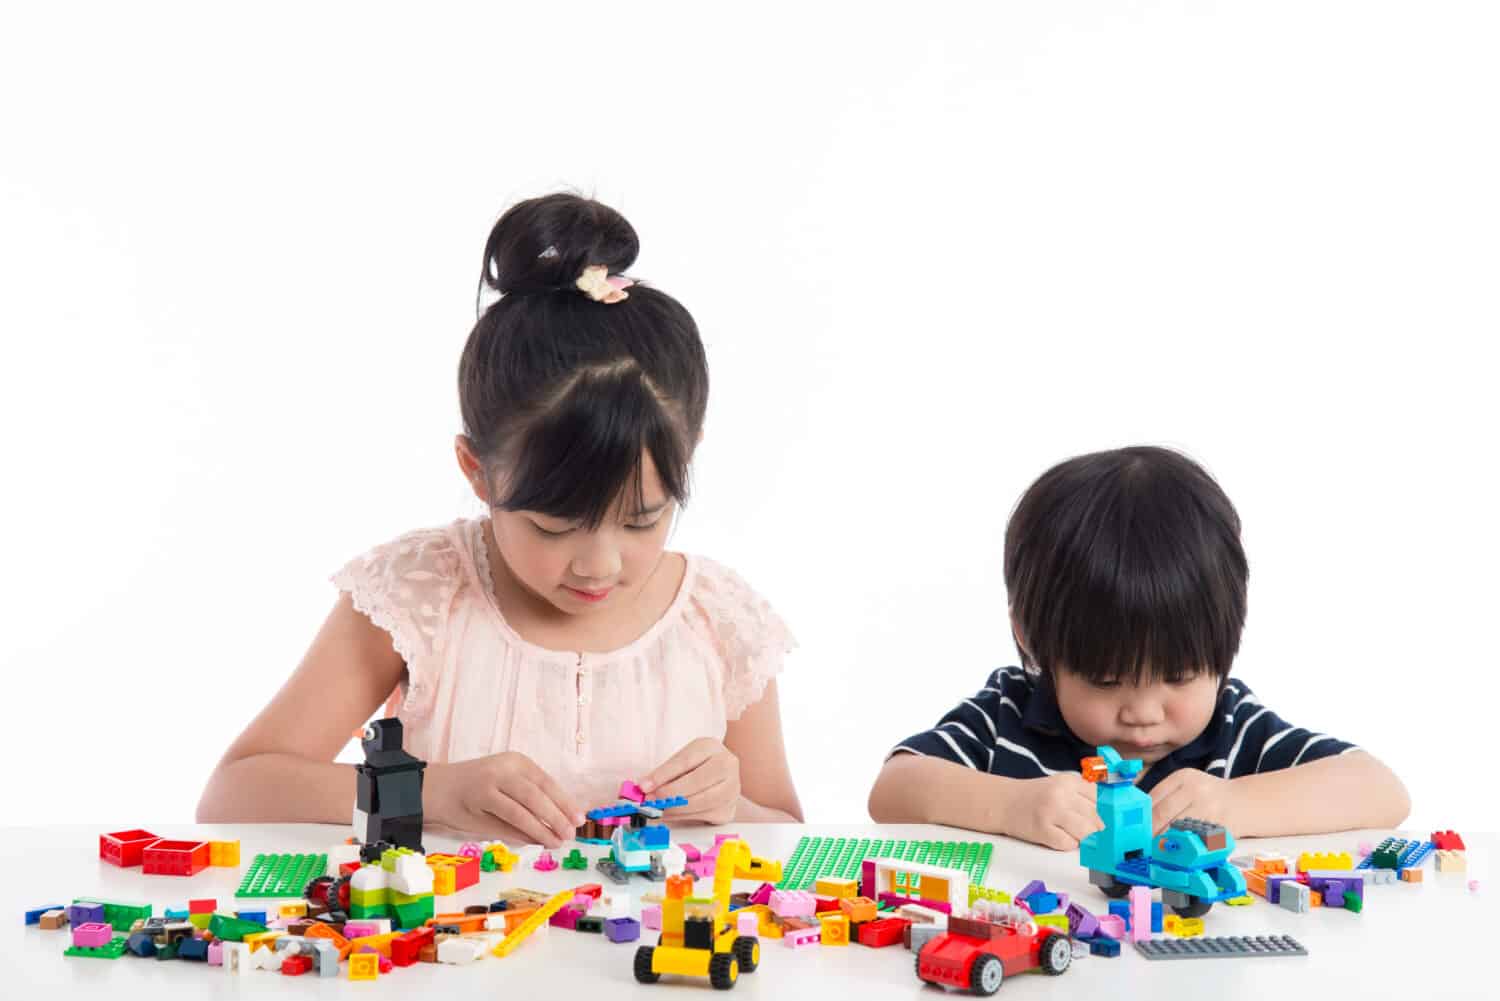 Little asian children playing with colorful construction blocks on white background isolated